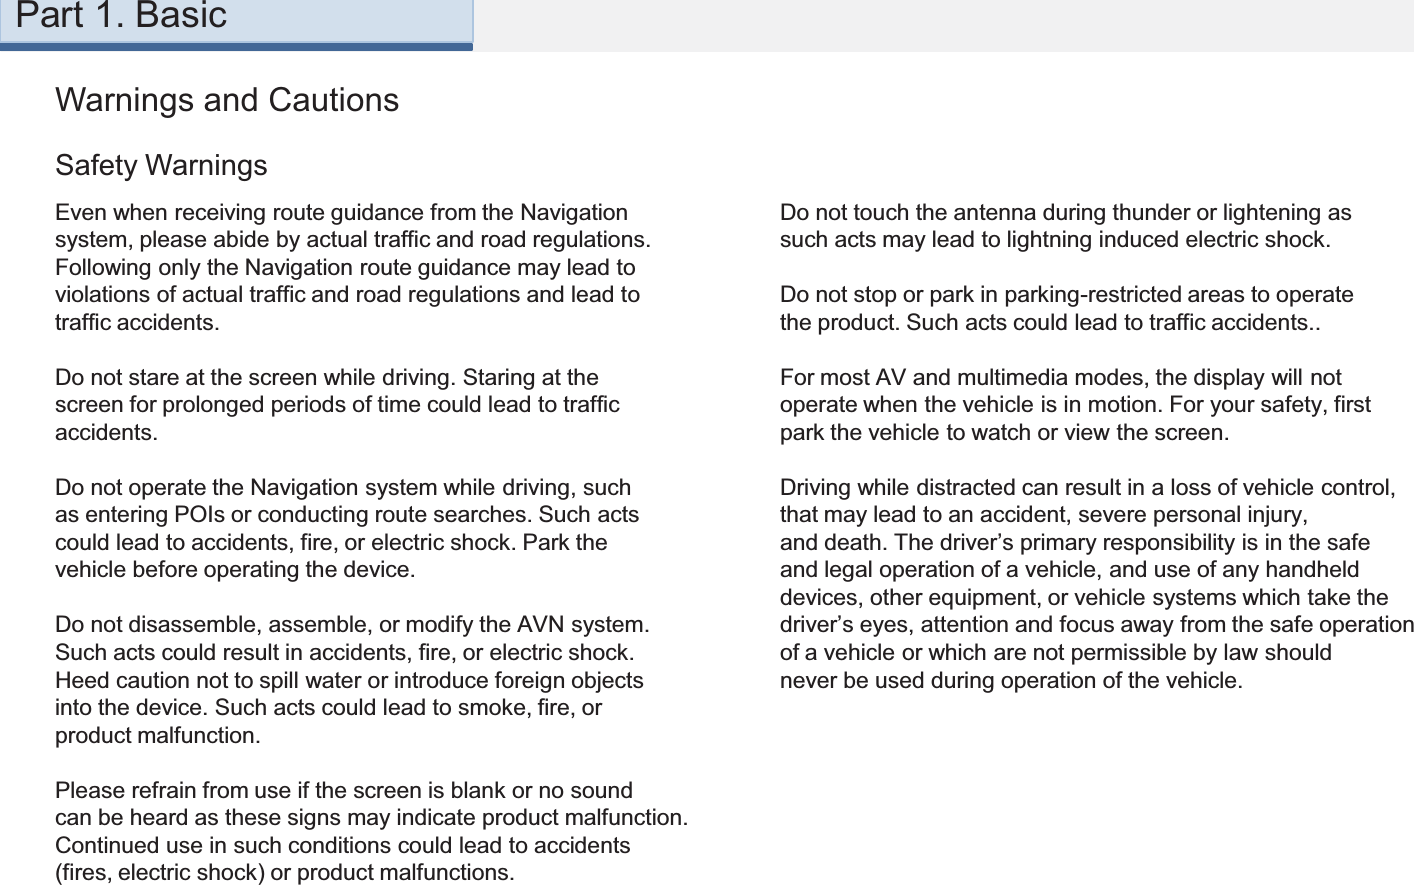 Warnings and CautionsEven when receiving route guidance from the Navigationsystem, please abide by actual traffic and road regulations.Following only the Navigation route guidance may lead toviolations of actual traffic and road regulations and lead totraffic accidents.Do not stare at the screen while driving. Staring at thescreen for prolonged periods of time could lead to trafficaccidents.Do not operate the Navigation system while driving, suchas entering POIs or conducting route searches. Such actscould lead to accidents, fire, or electric shock. Park thevehicle before operating the device.Do not disassemble, assemble, or modify the AVN system.Such acts could result in accidents, fire, or electric shock.Heed caution not to spill water or introduce foreign objectsinto the device. Such acts could lead to smoke, fire, orproduct malfunction.Please refrain from use if the screen is blank or no soundcan be heard as these signs may indicate product malfunction.Continued use in such conditions could lead to accidents(fires, electric shock) or product malfunctions.Safety WarningsDo not touch the antenna during thunder or lightening assuch acts may lead to lightning induced electric shock.Do not stop or park in parking-restricted areas to operatethe product. Such acts could lead to traffic accidents..For most AV and multimedia modes, the display will notoperate when the vehicle is in motion. For your safety, firstpark the vehicle to watch or view the screen. Driving while distracted can result in a loss of vehicle control,that may lead to an accident, severe personal injury,and death. The driver’s primary responsibility is in the safeand legal operation of a vehicle, and use of any handhelddevices, other equipment, or vehicle systems which take thedriver’s eyes, attention and focus away from the safe operationof a vehicle or which are not permissible by law shouldnever be used during operation of the vehicle.Part 1. Basic